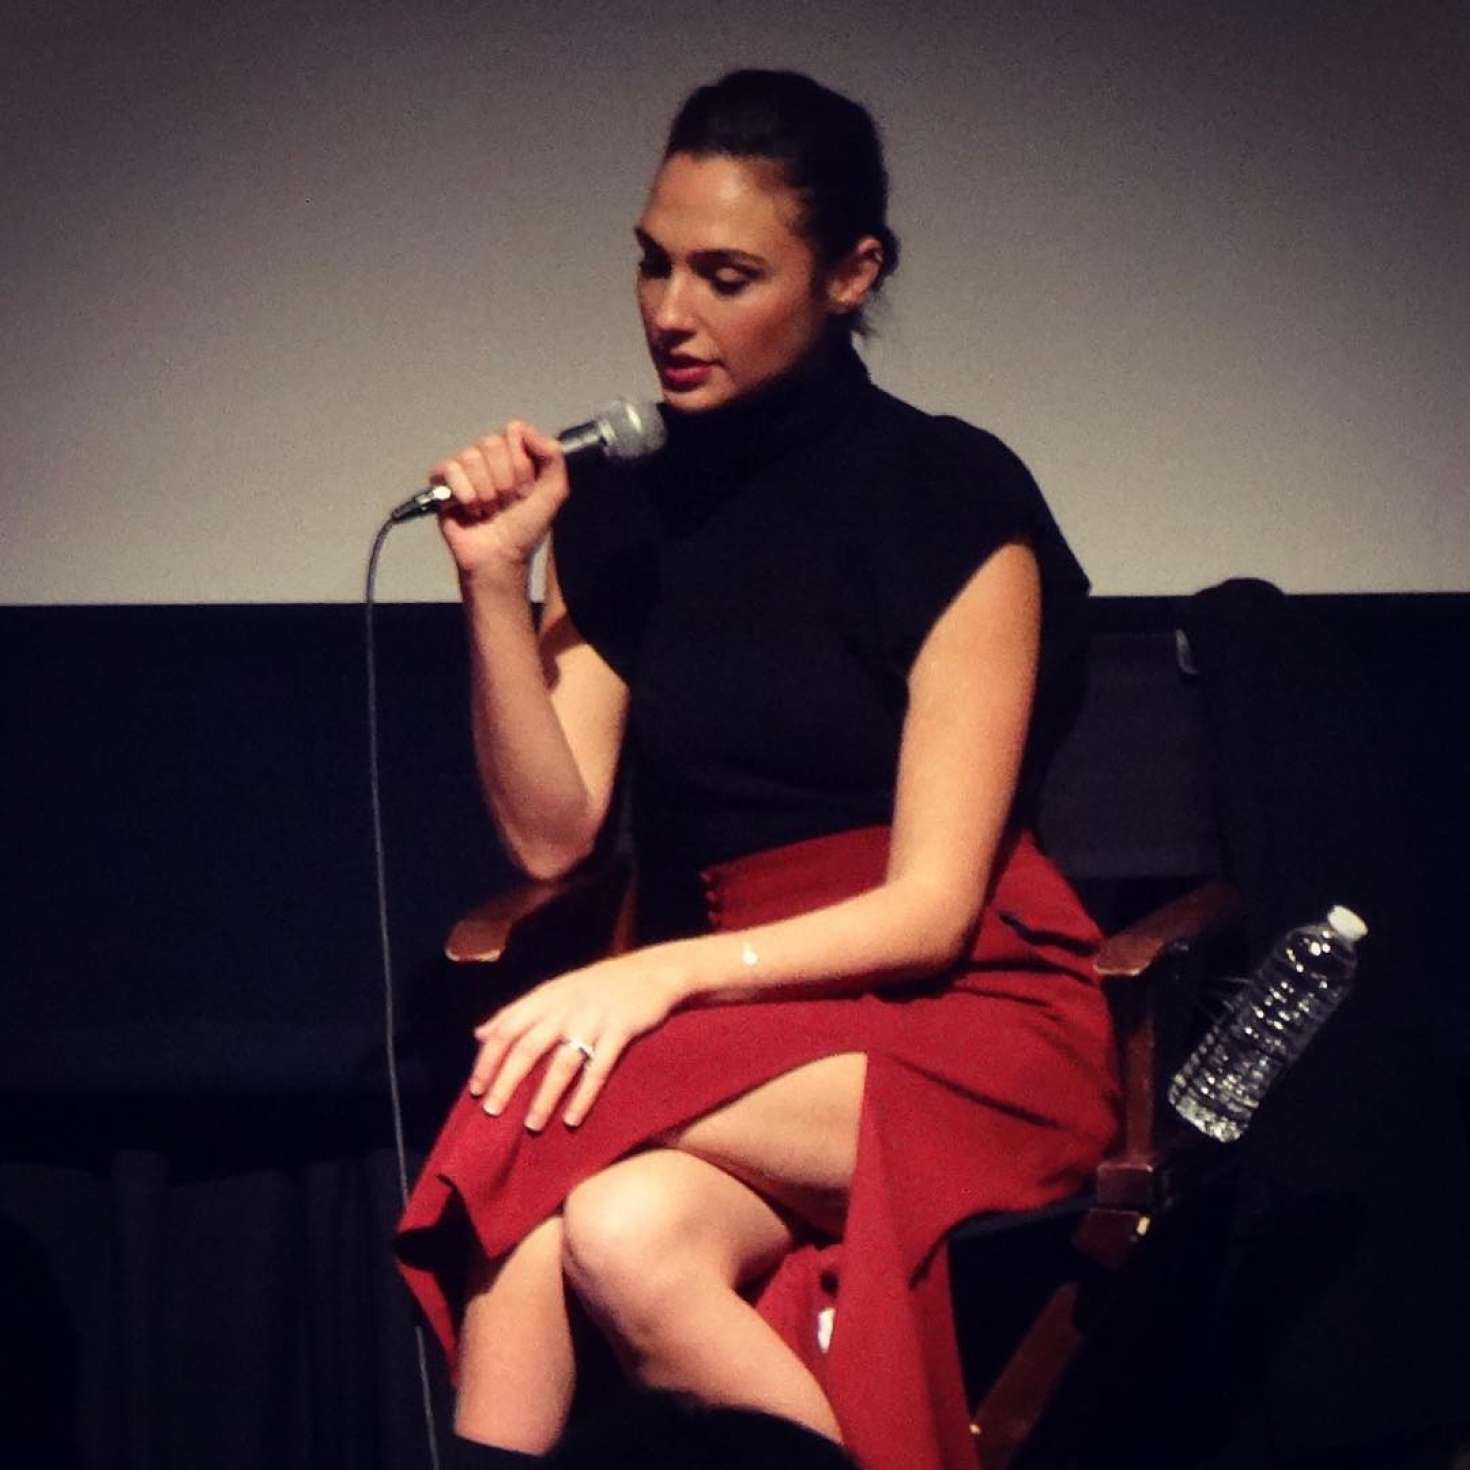 Gal Gadot - 'Wonder Woman' question and answer session